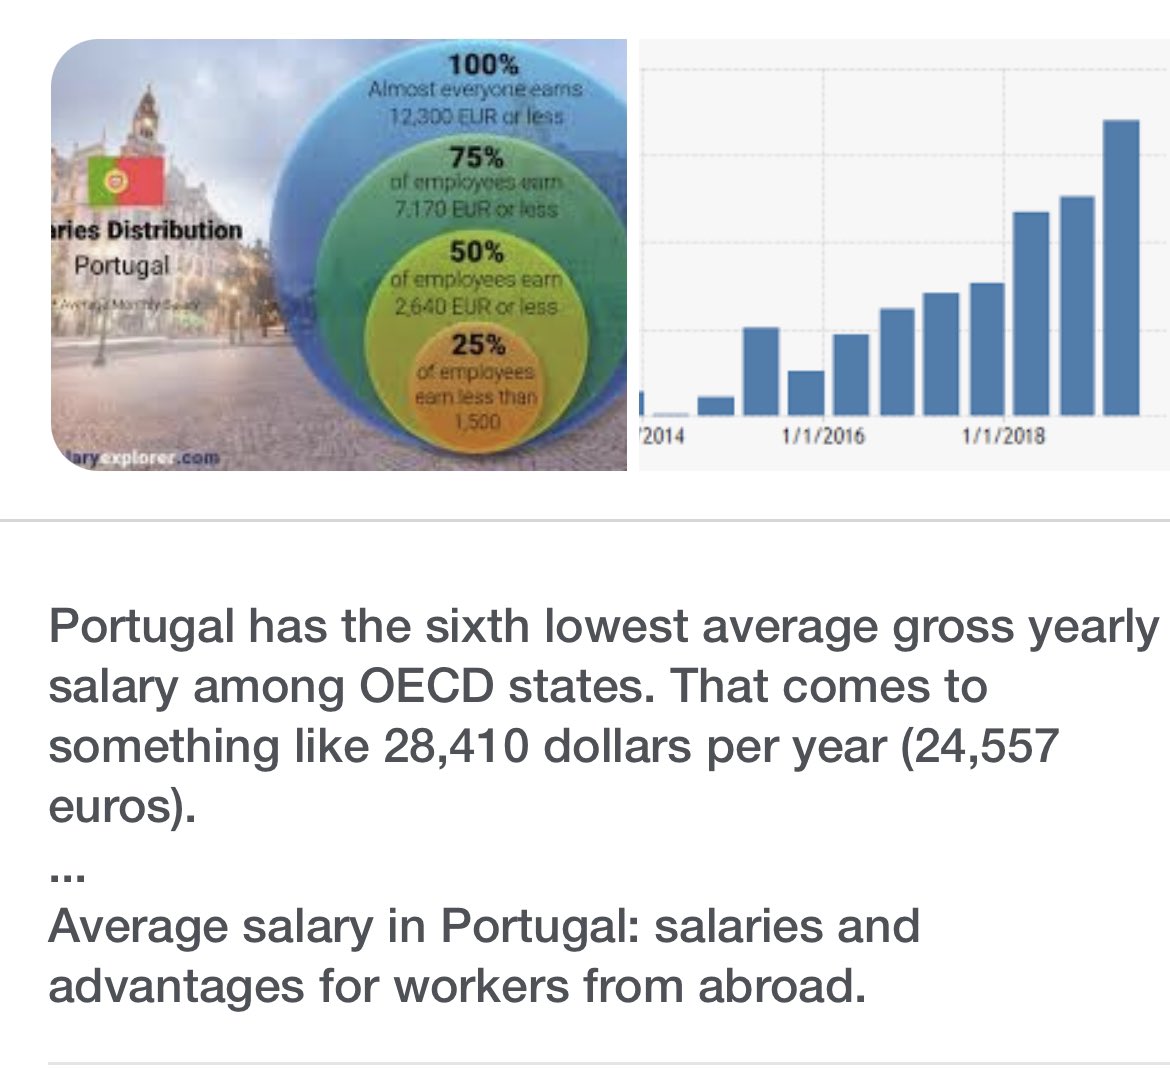 Average wage in Portugal is 24.5k euros